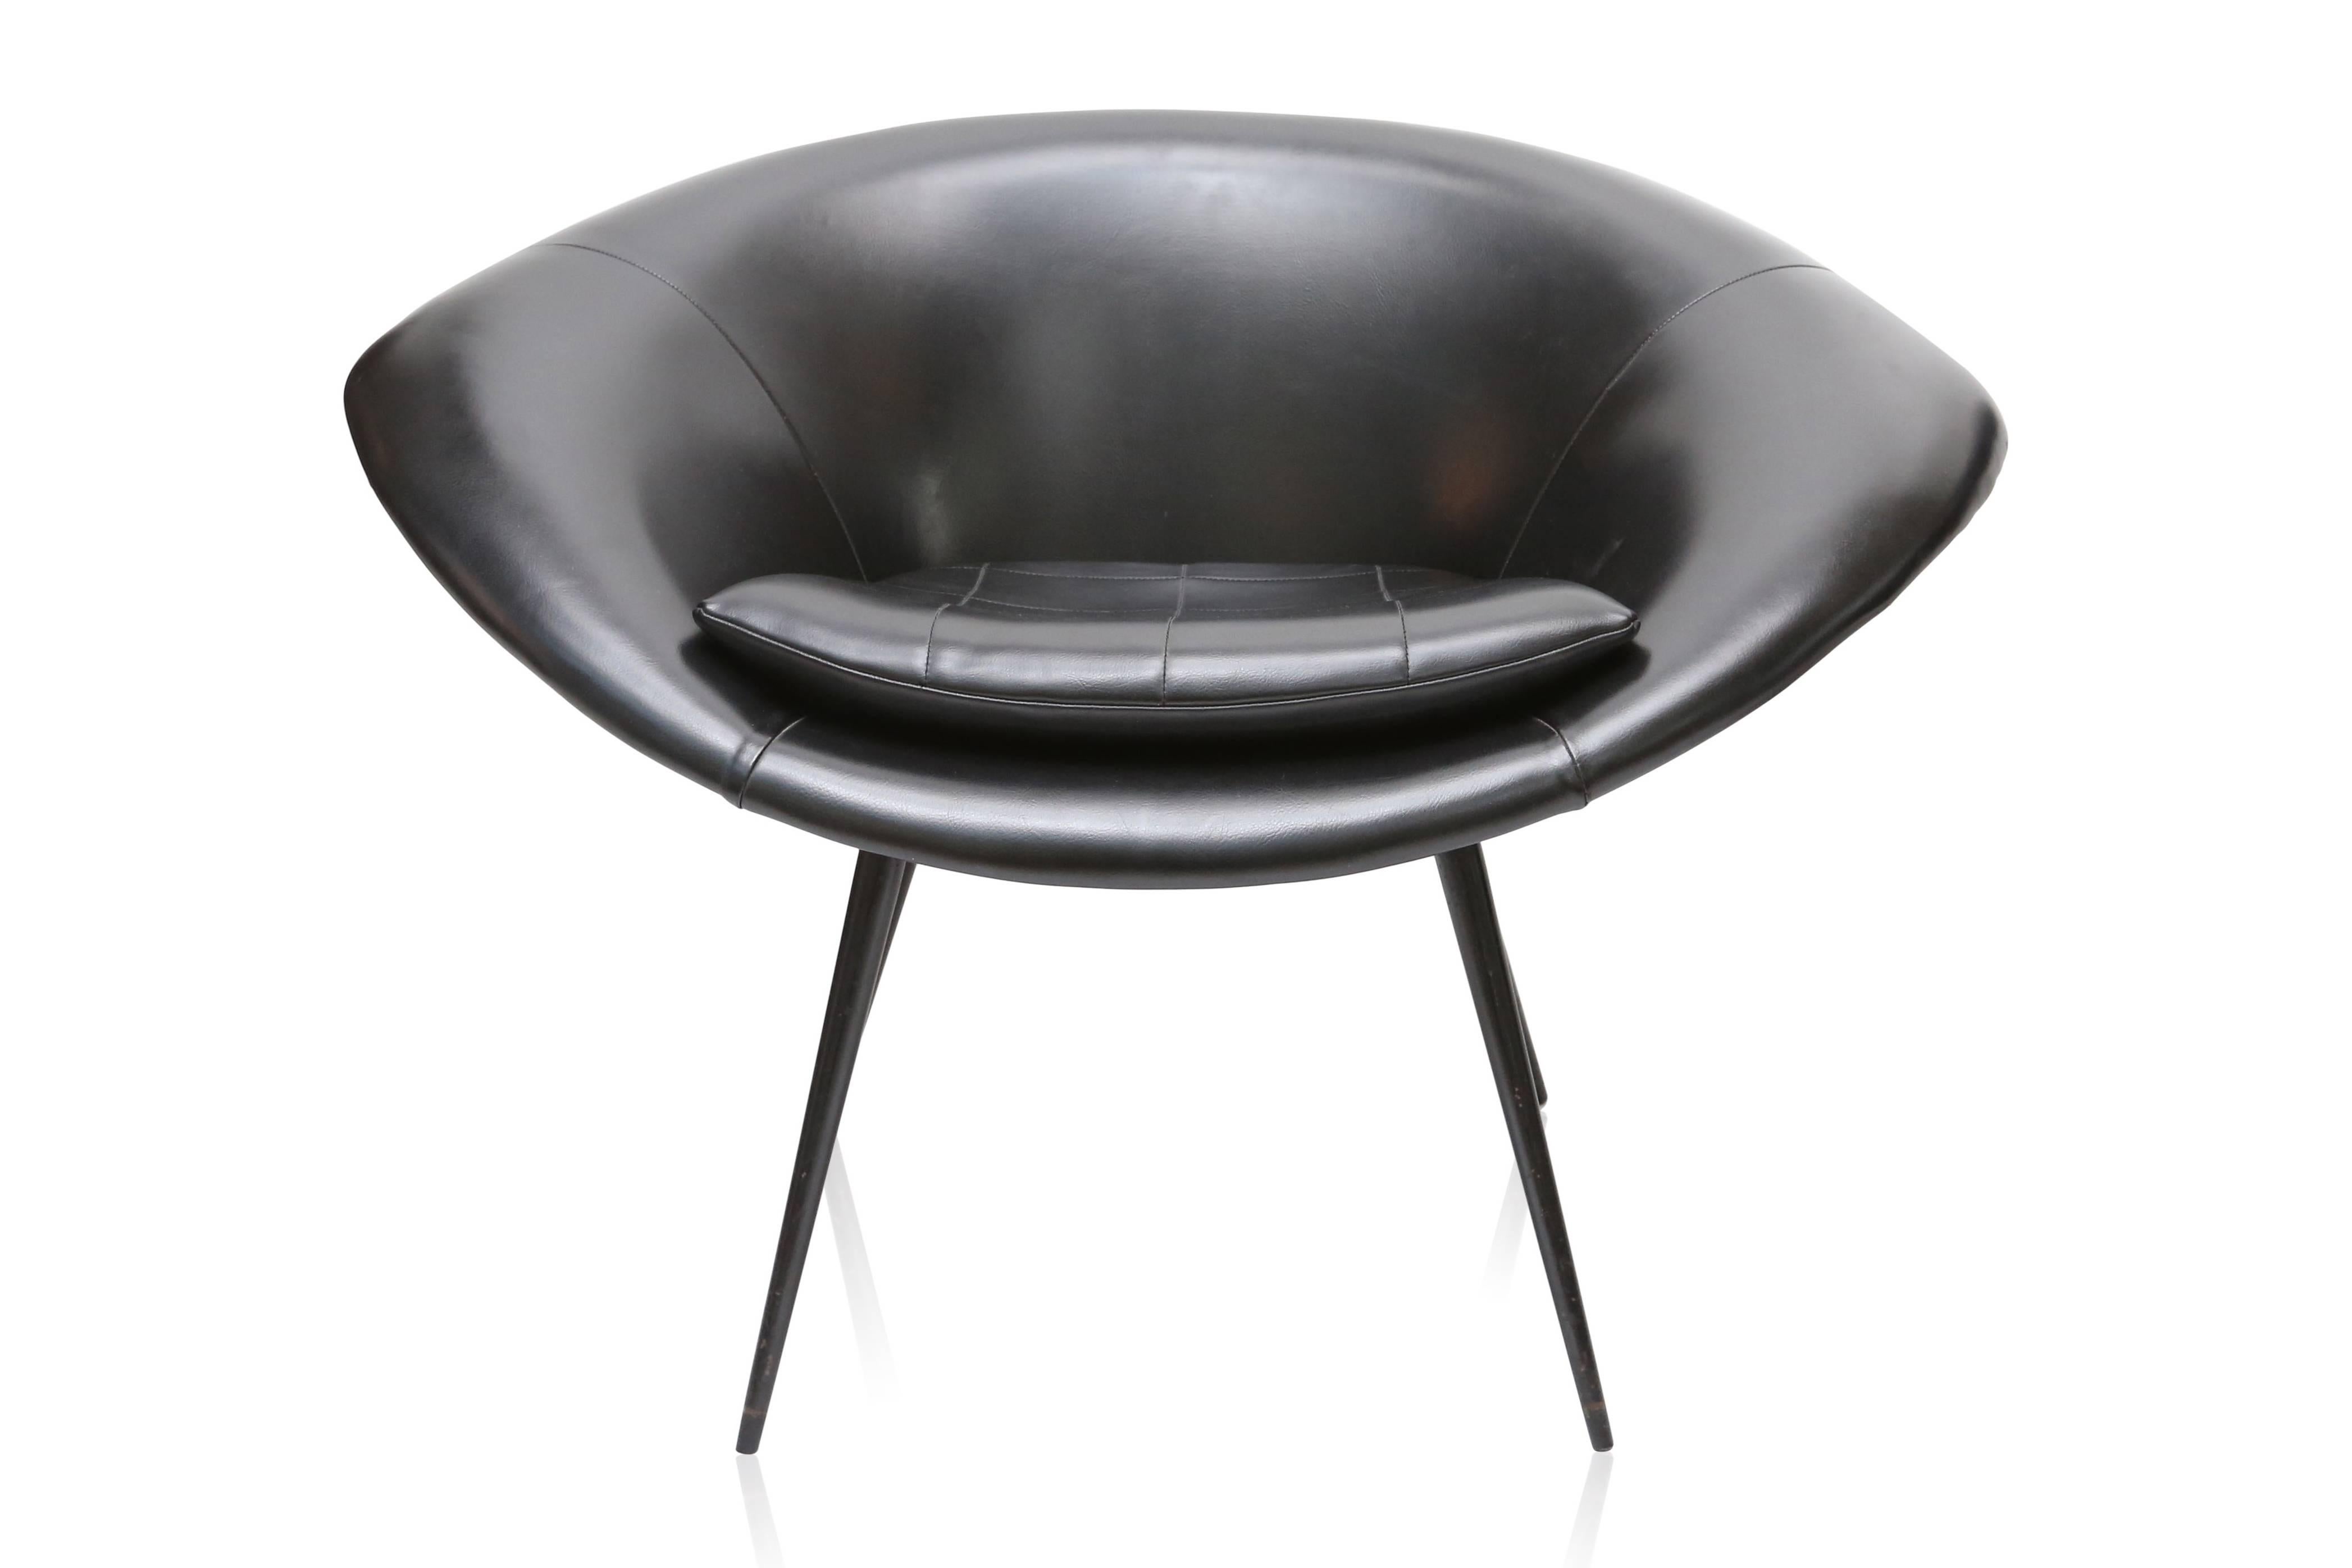 Black vinyl Spage age armchairs.
Oyster shaped seating, black metal frame.

Attributed to Pierre Guariche.

France, Spage Age, 1960s.

Measures: H 70 cm x W 100 cm x D 50 cm.